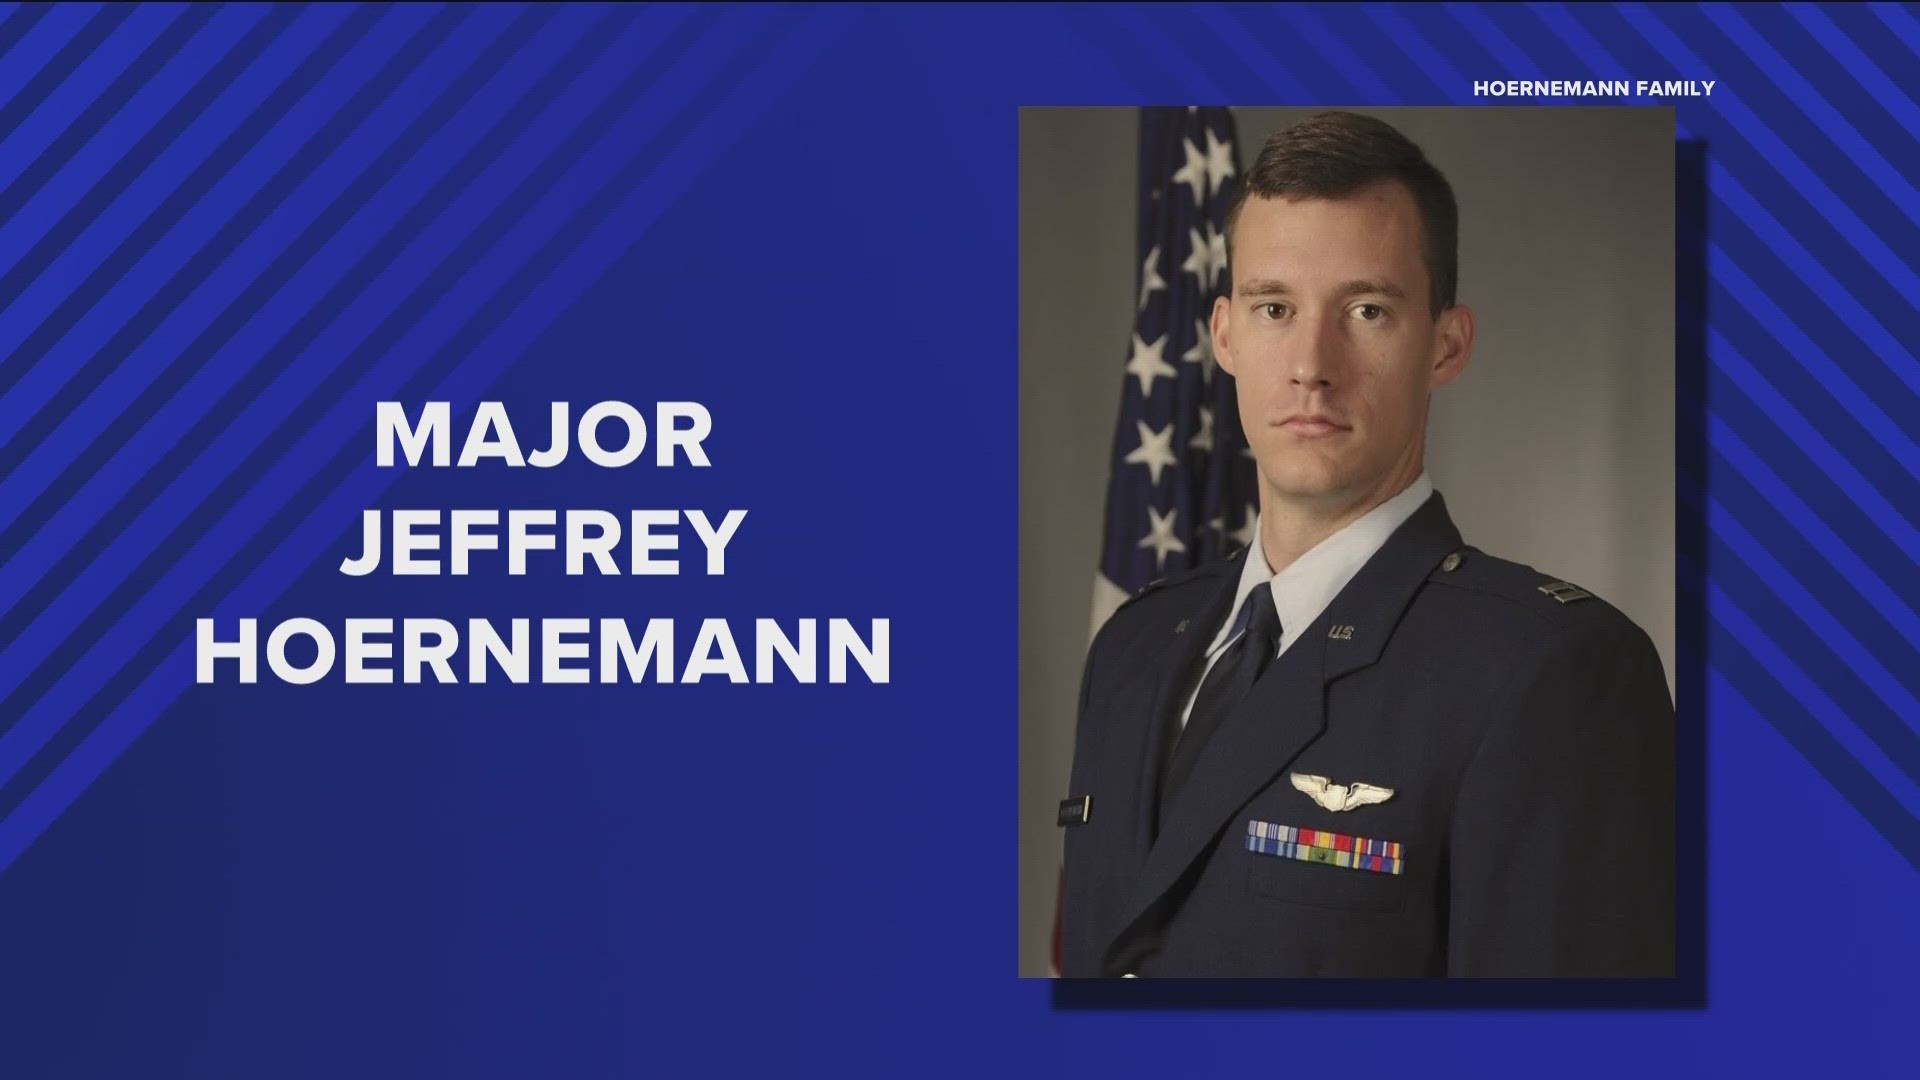 U.S. Air Force Maj. Jeffrey T. Hoernemann, 32, was a CV-22 instructor pilot and officer in charge of training, according to the Air Force.